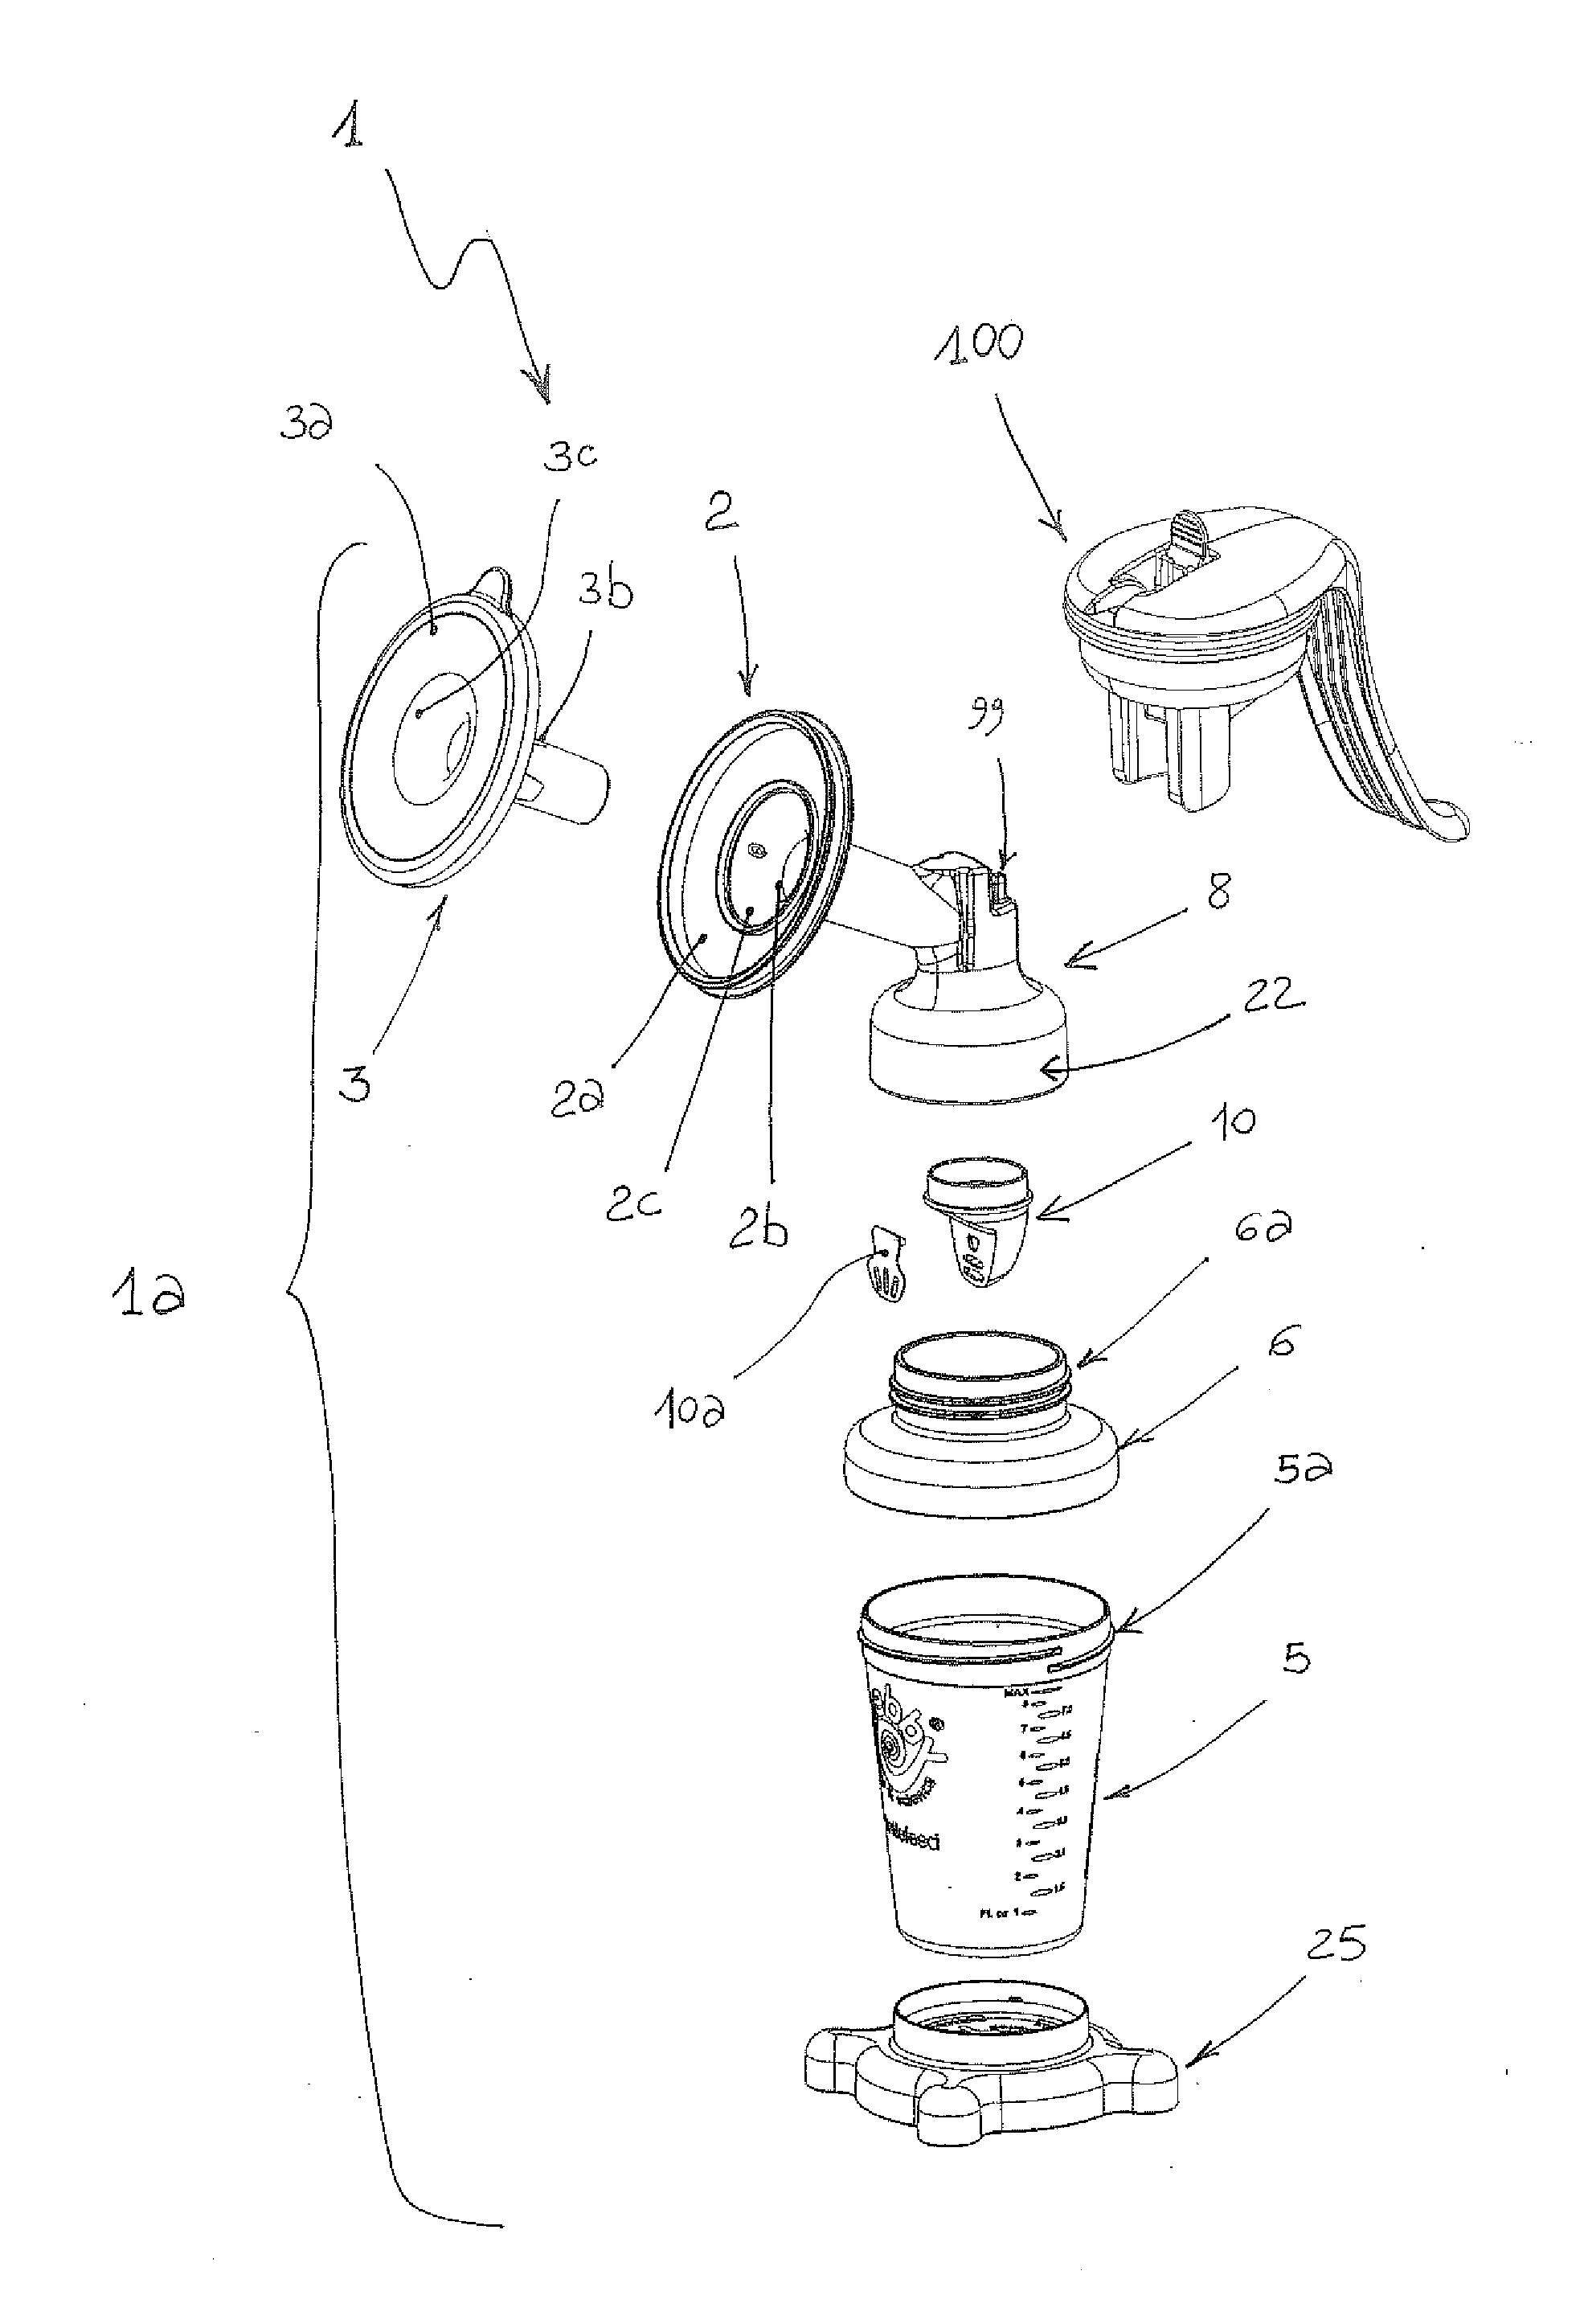 Apparatus for extracting milk from a breast and related pump unit